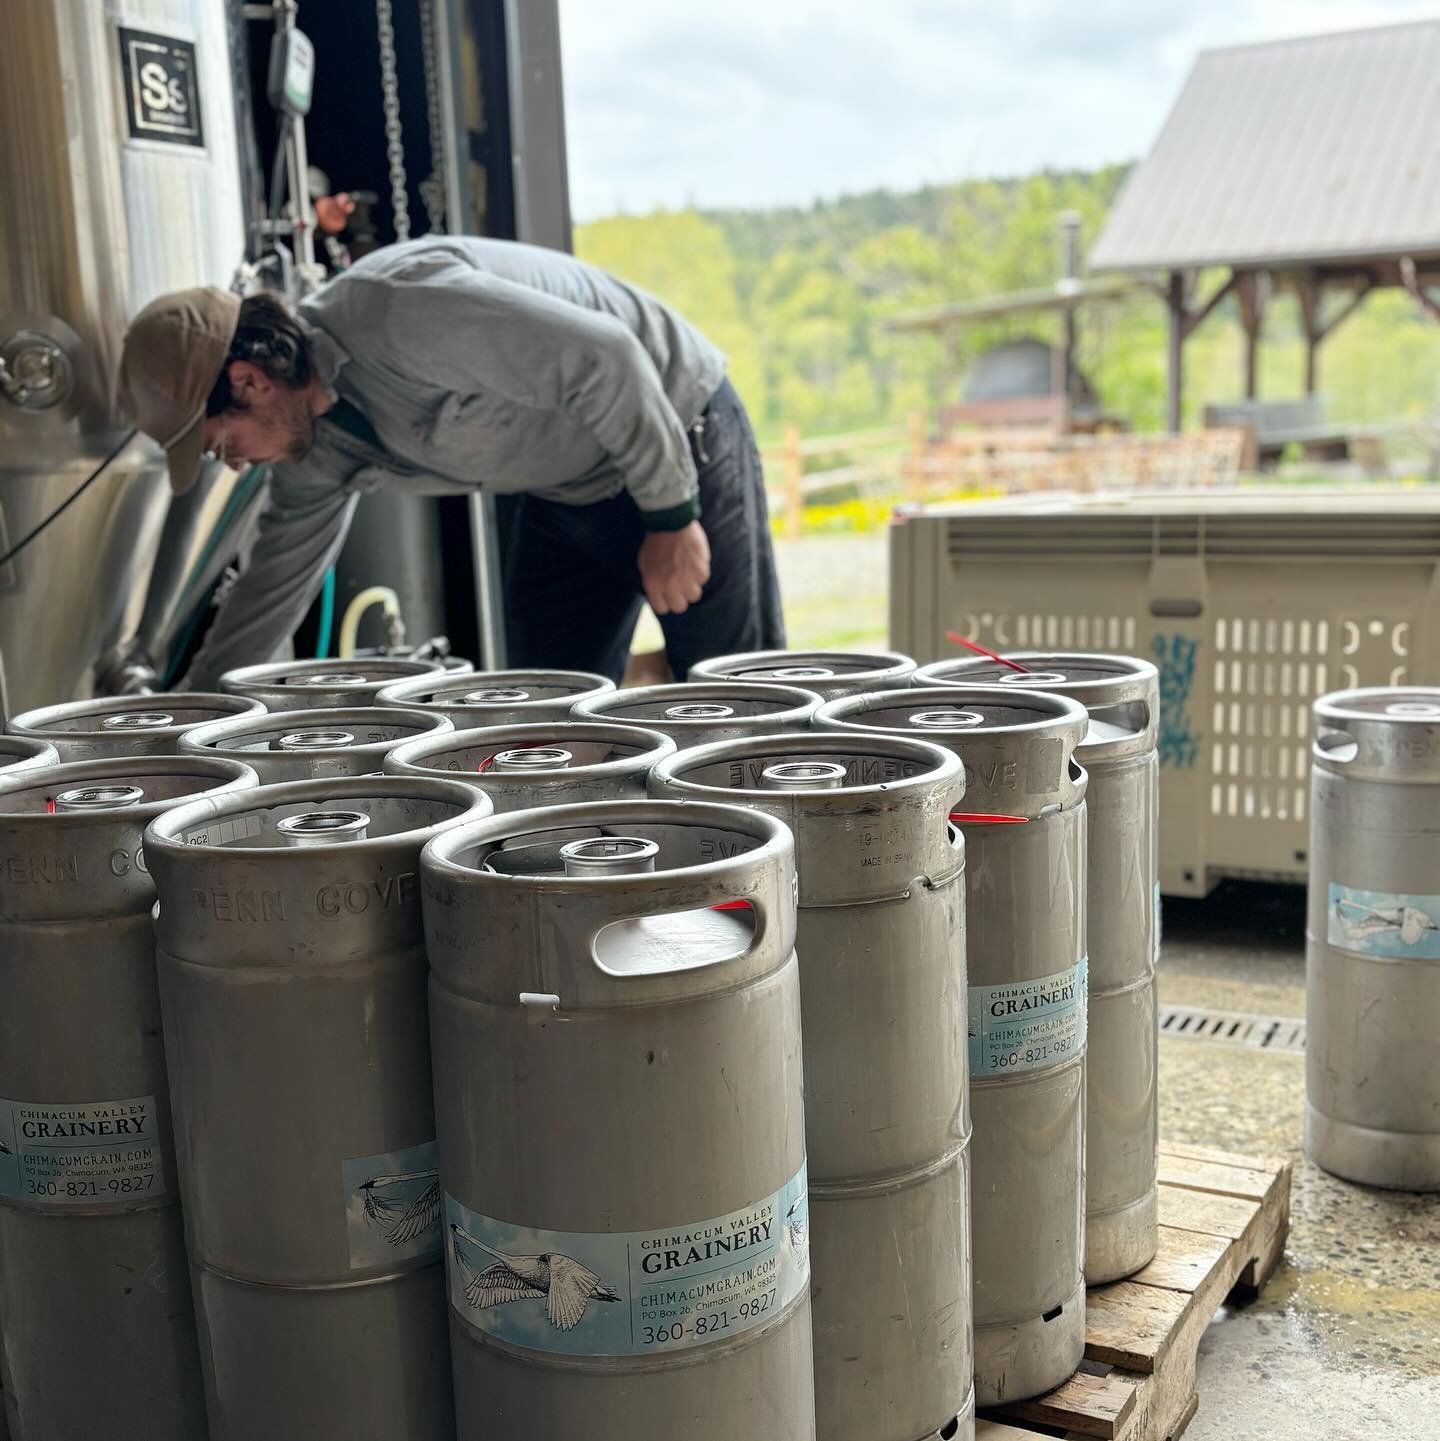 And they&rsquo;re off! 

Soft release as we send out the first kegs of the Grainery&rsquo;s &lsquo;Hazy &amp;  Harrowing&rsquo;* Pale Ale, making their way over to Finnriver and the PT Pourhouse.
@ptpourhouse 
@finnriver 
with regional deliveries for